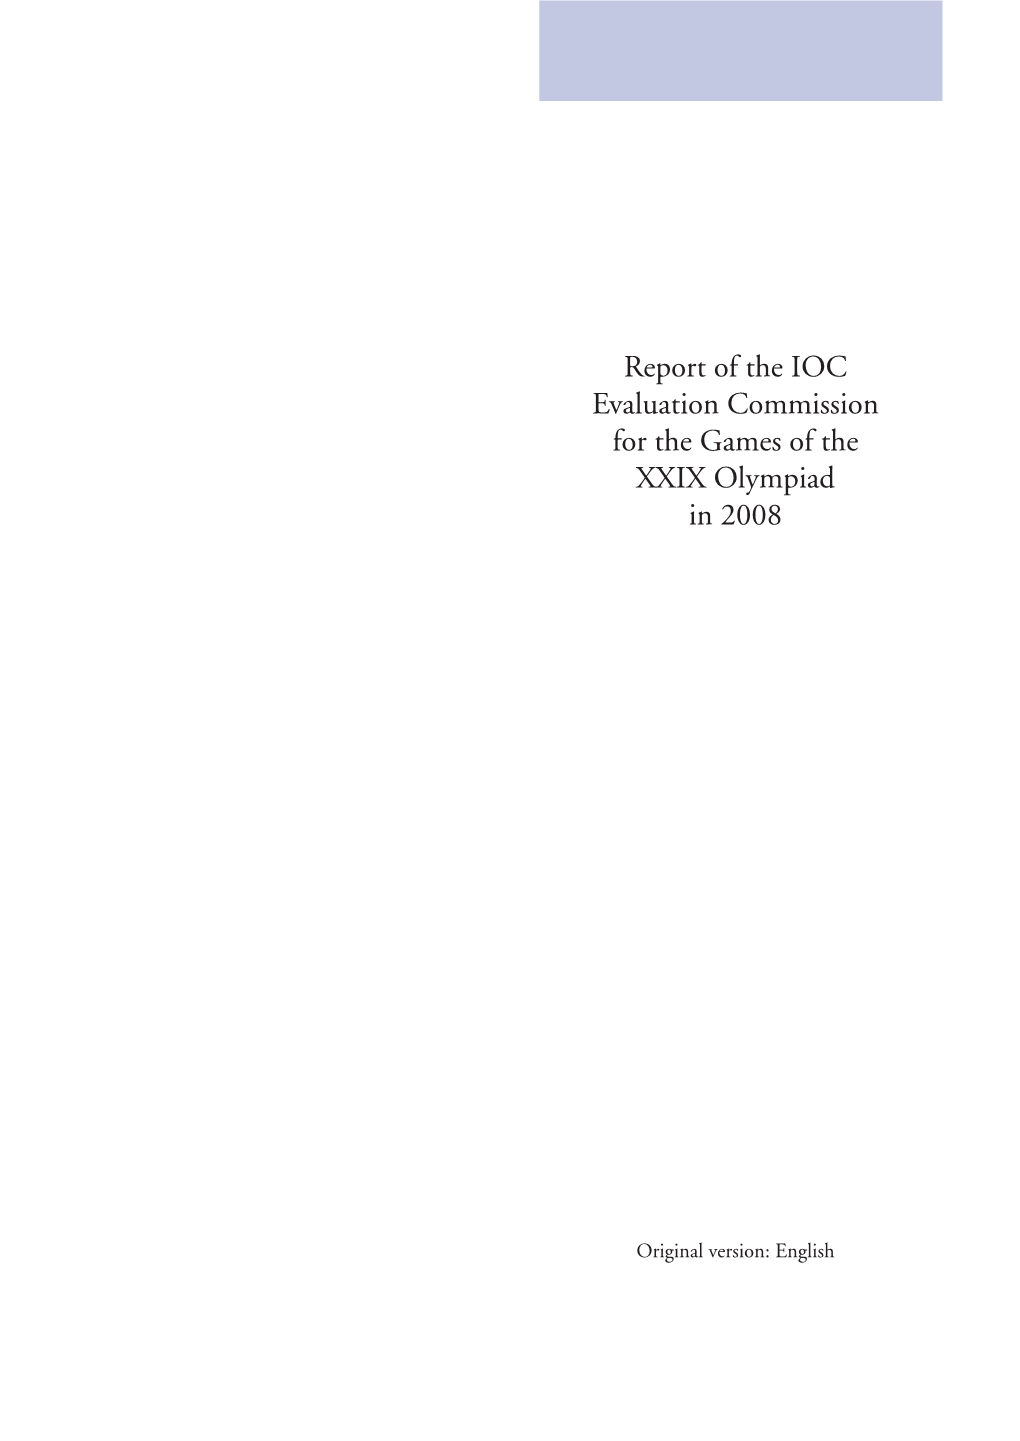 Report of the IOC Evaluation Commission for the Games of the XXIX Olympiad in 2008